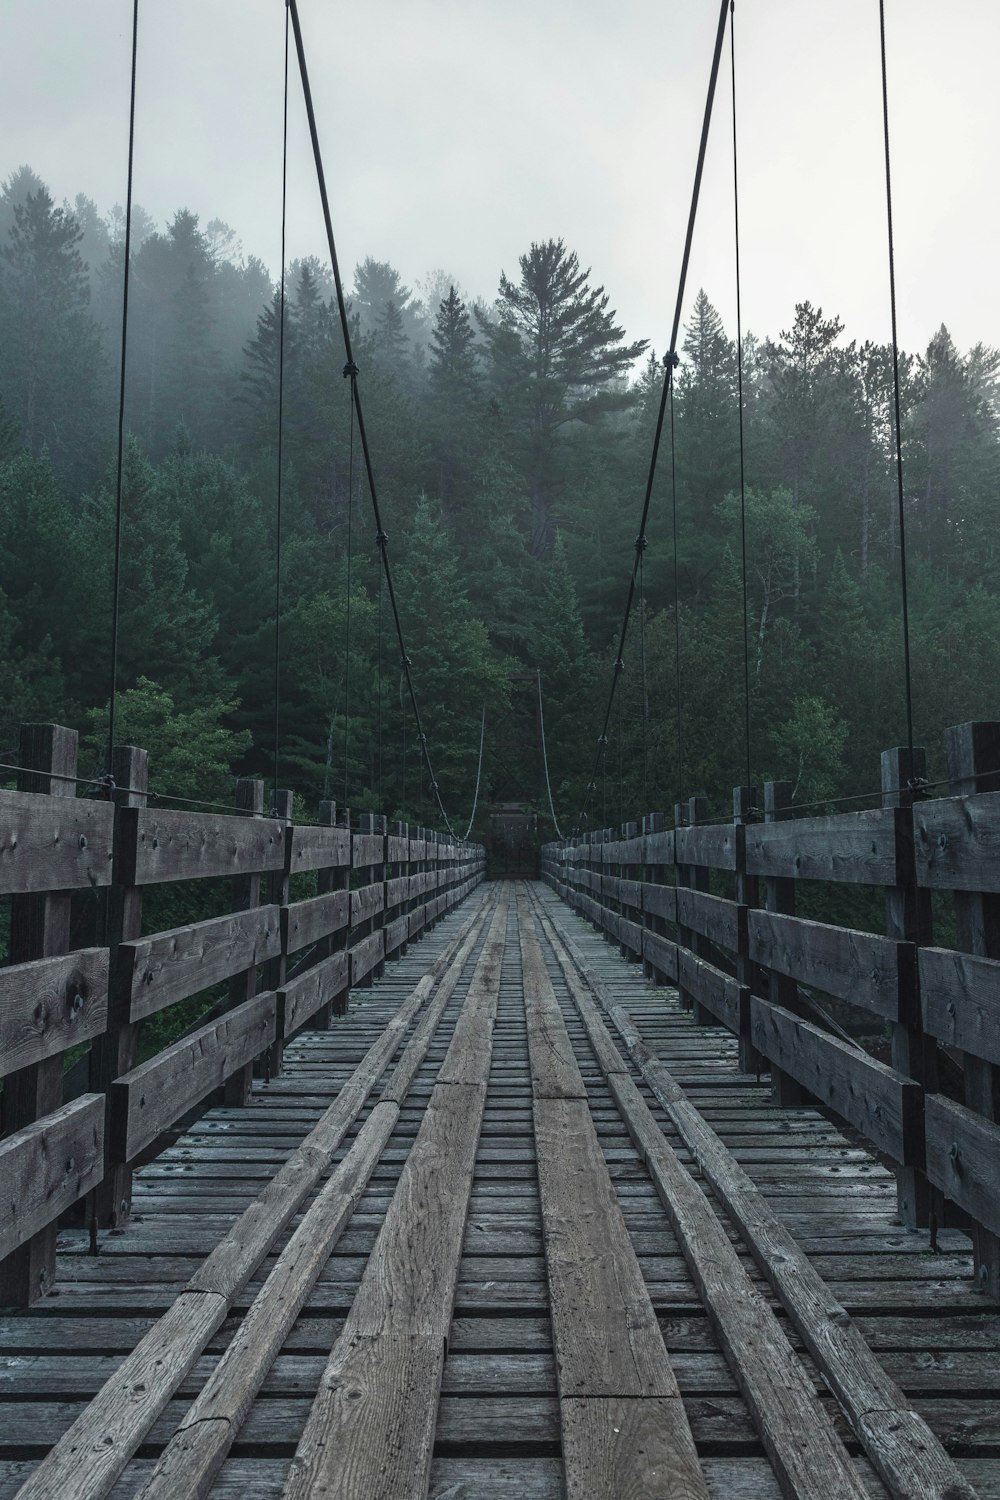 brown wooden bridge in the forest